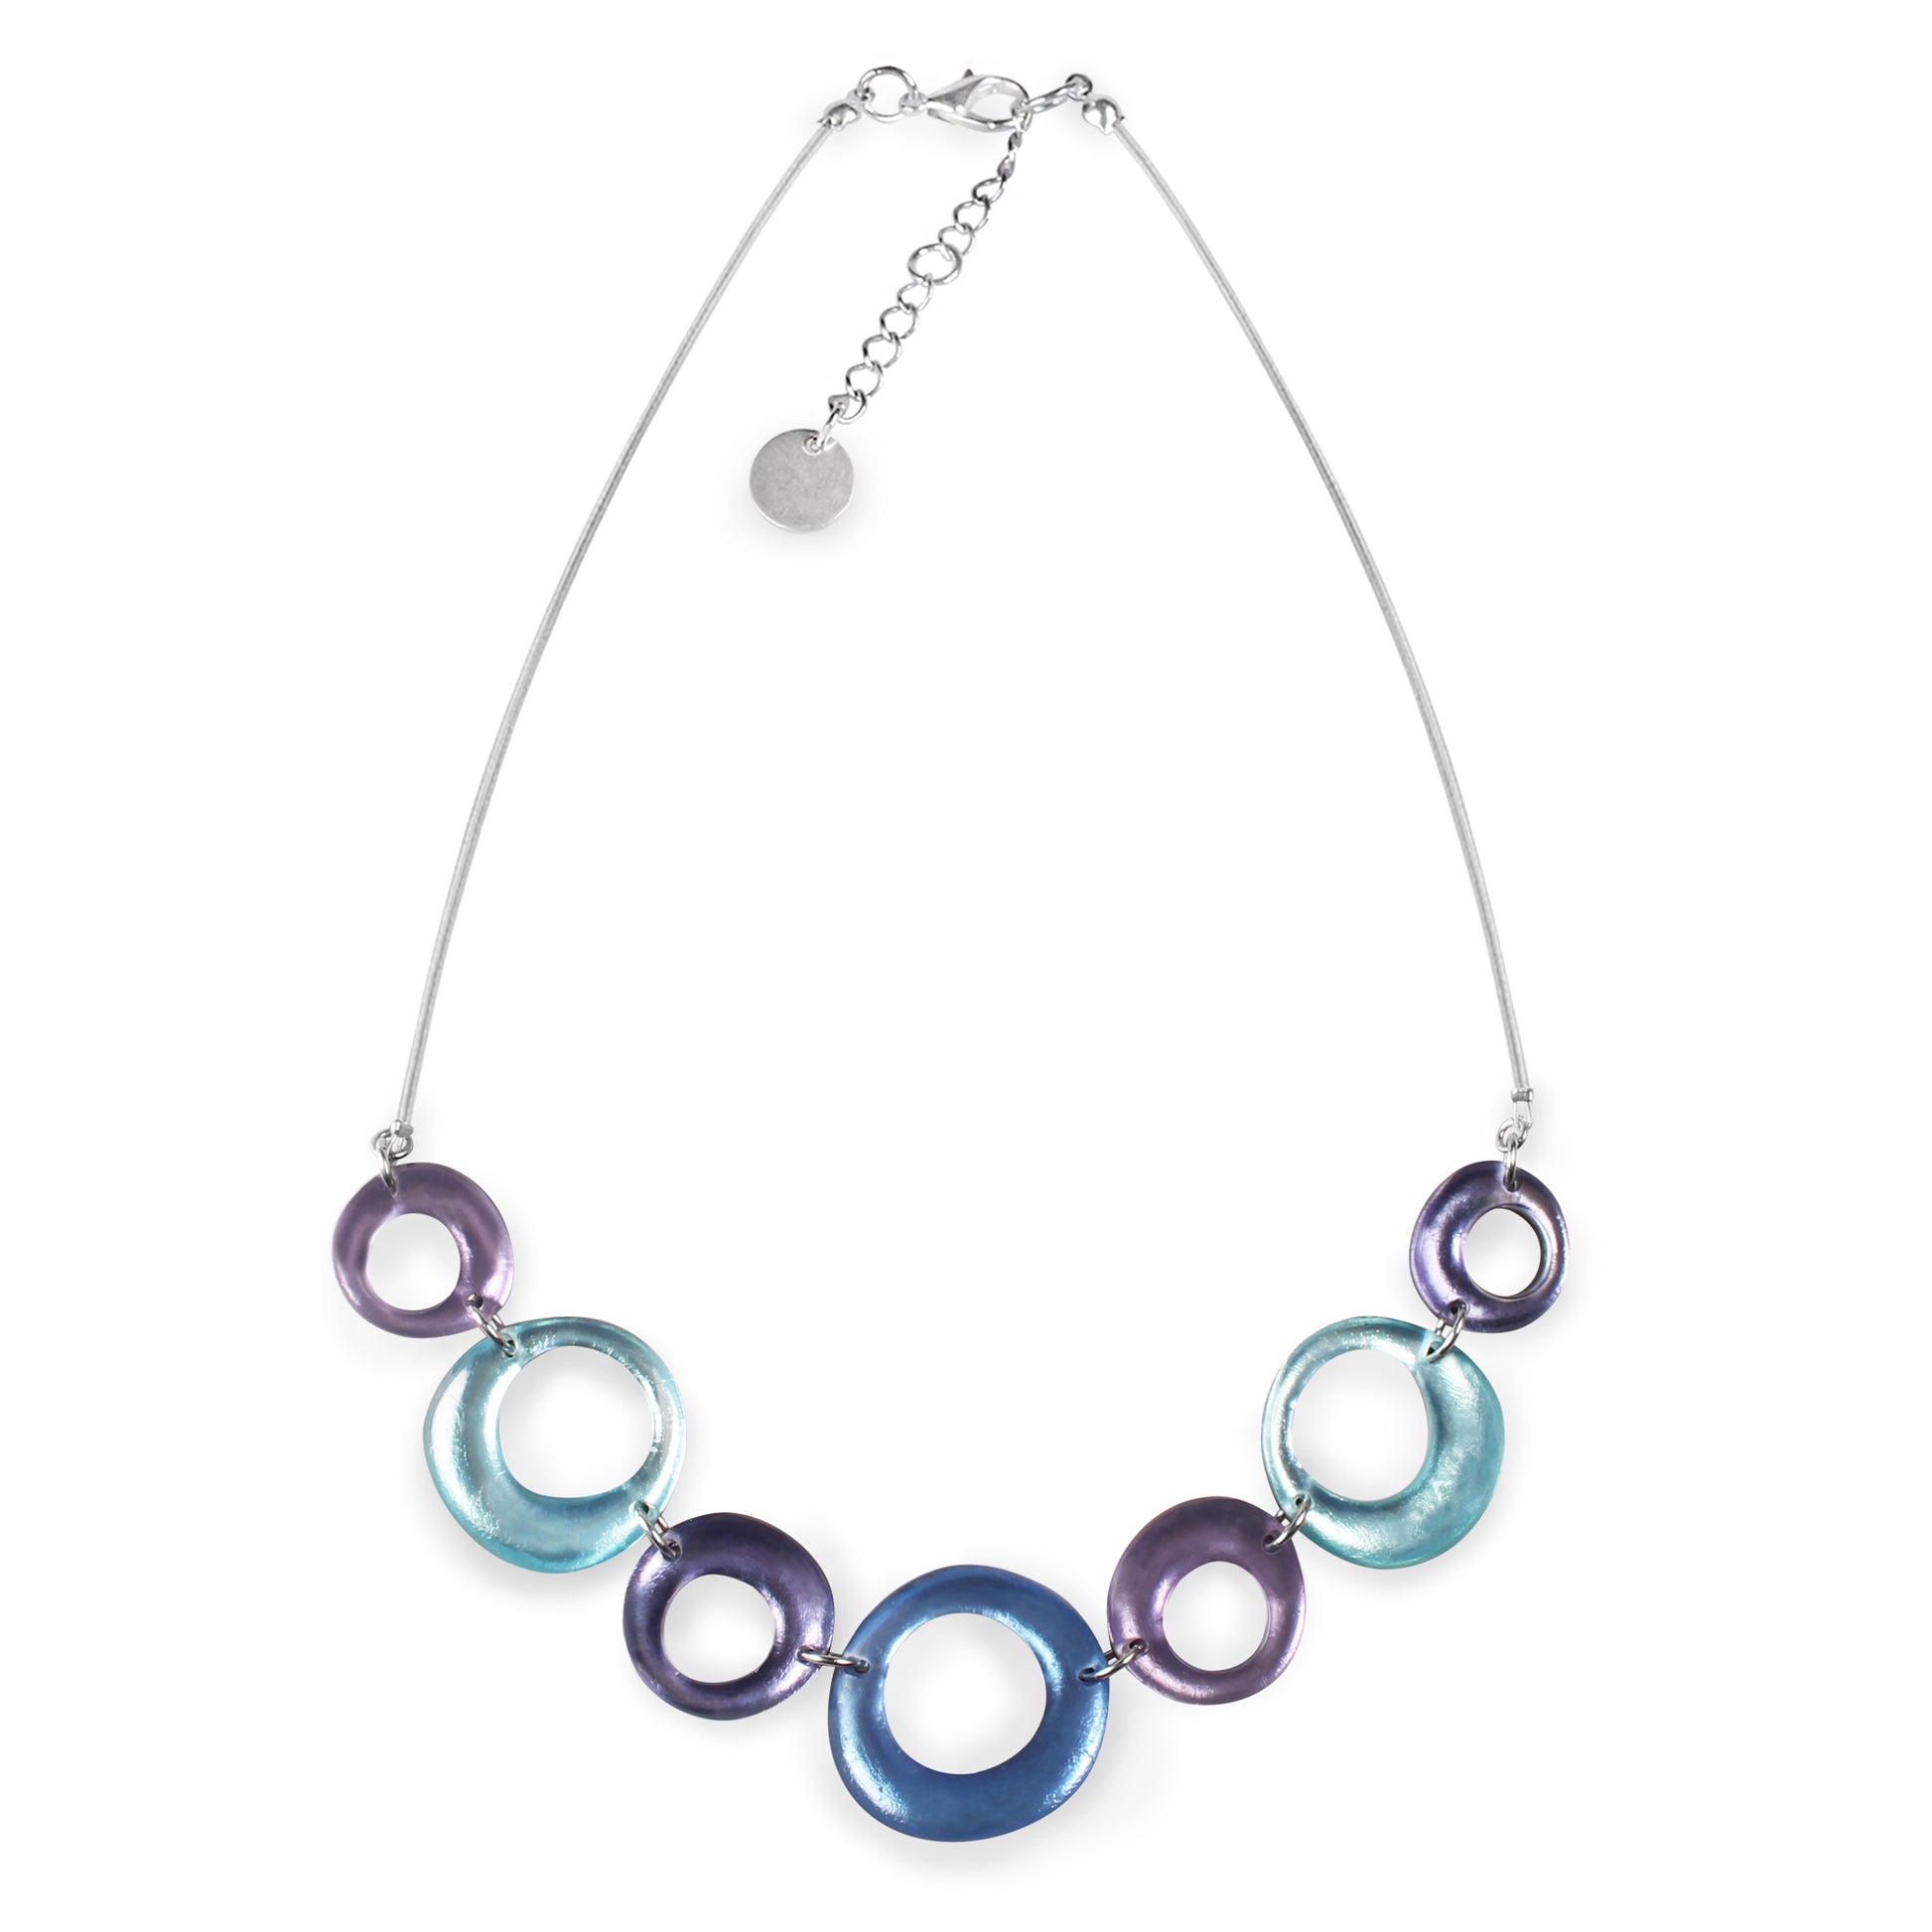 Lupin Hollow Circles Shiny Large Necklace